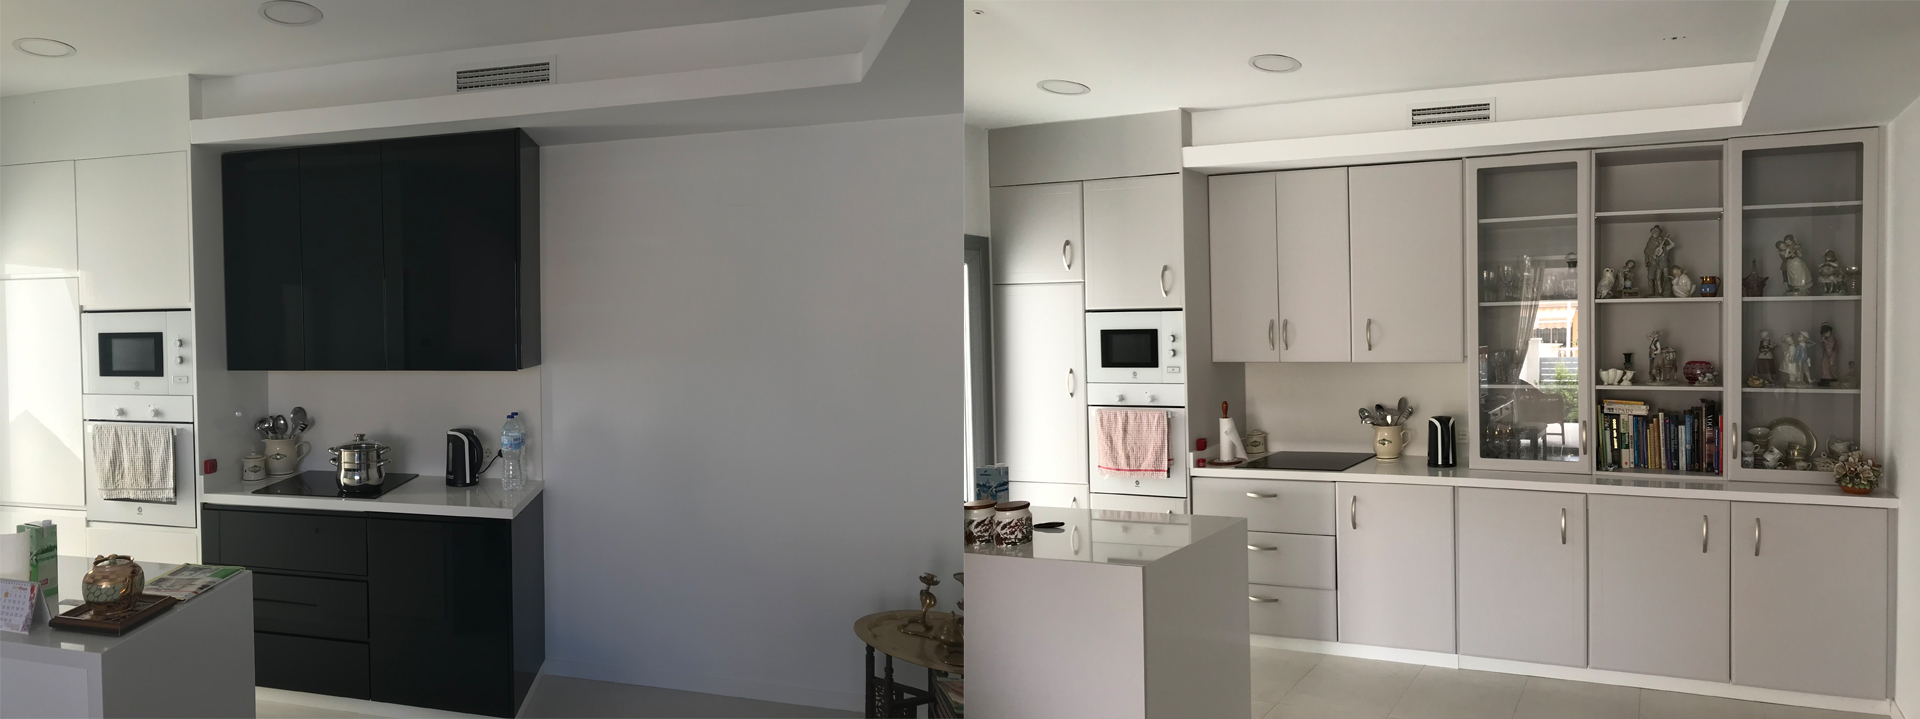 Kitchen-renovation-before-and-after-2